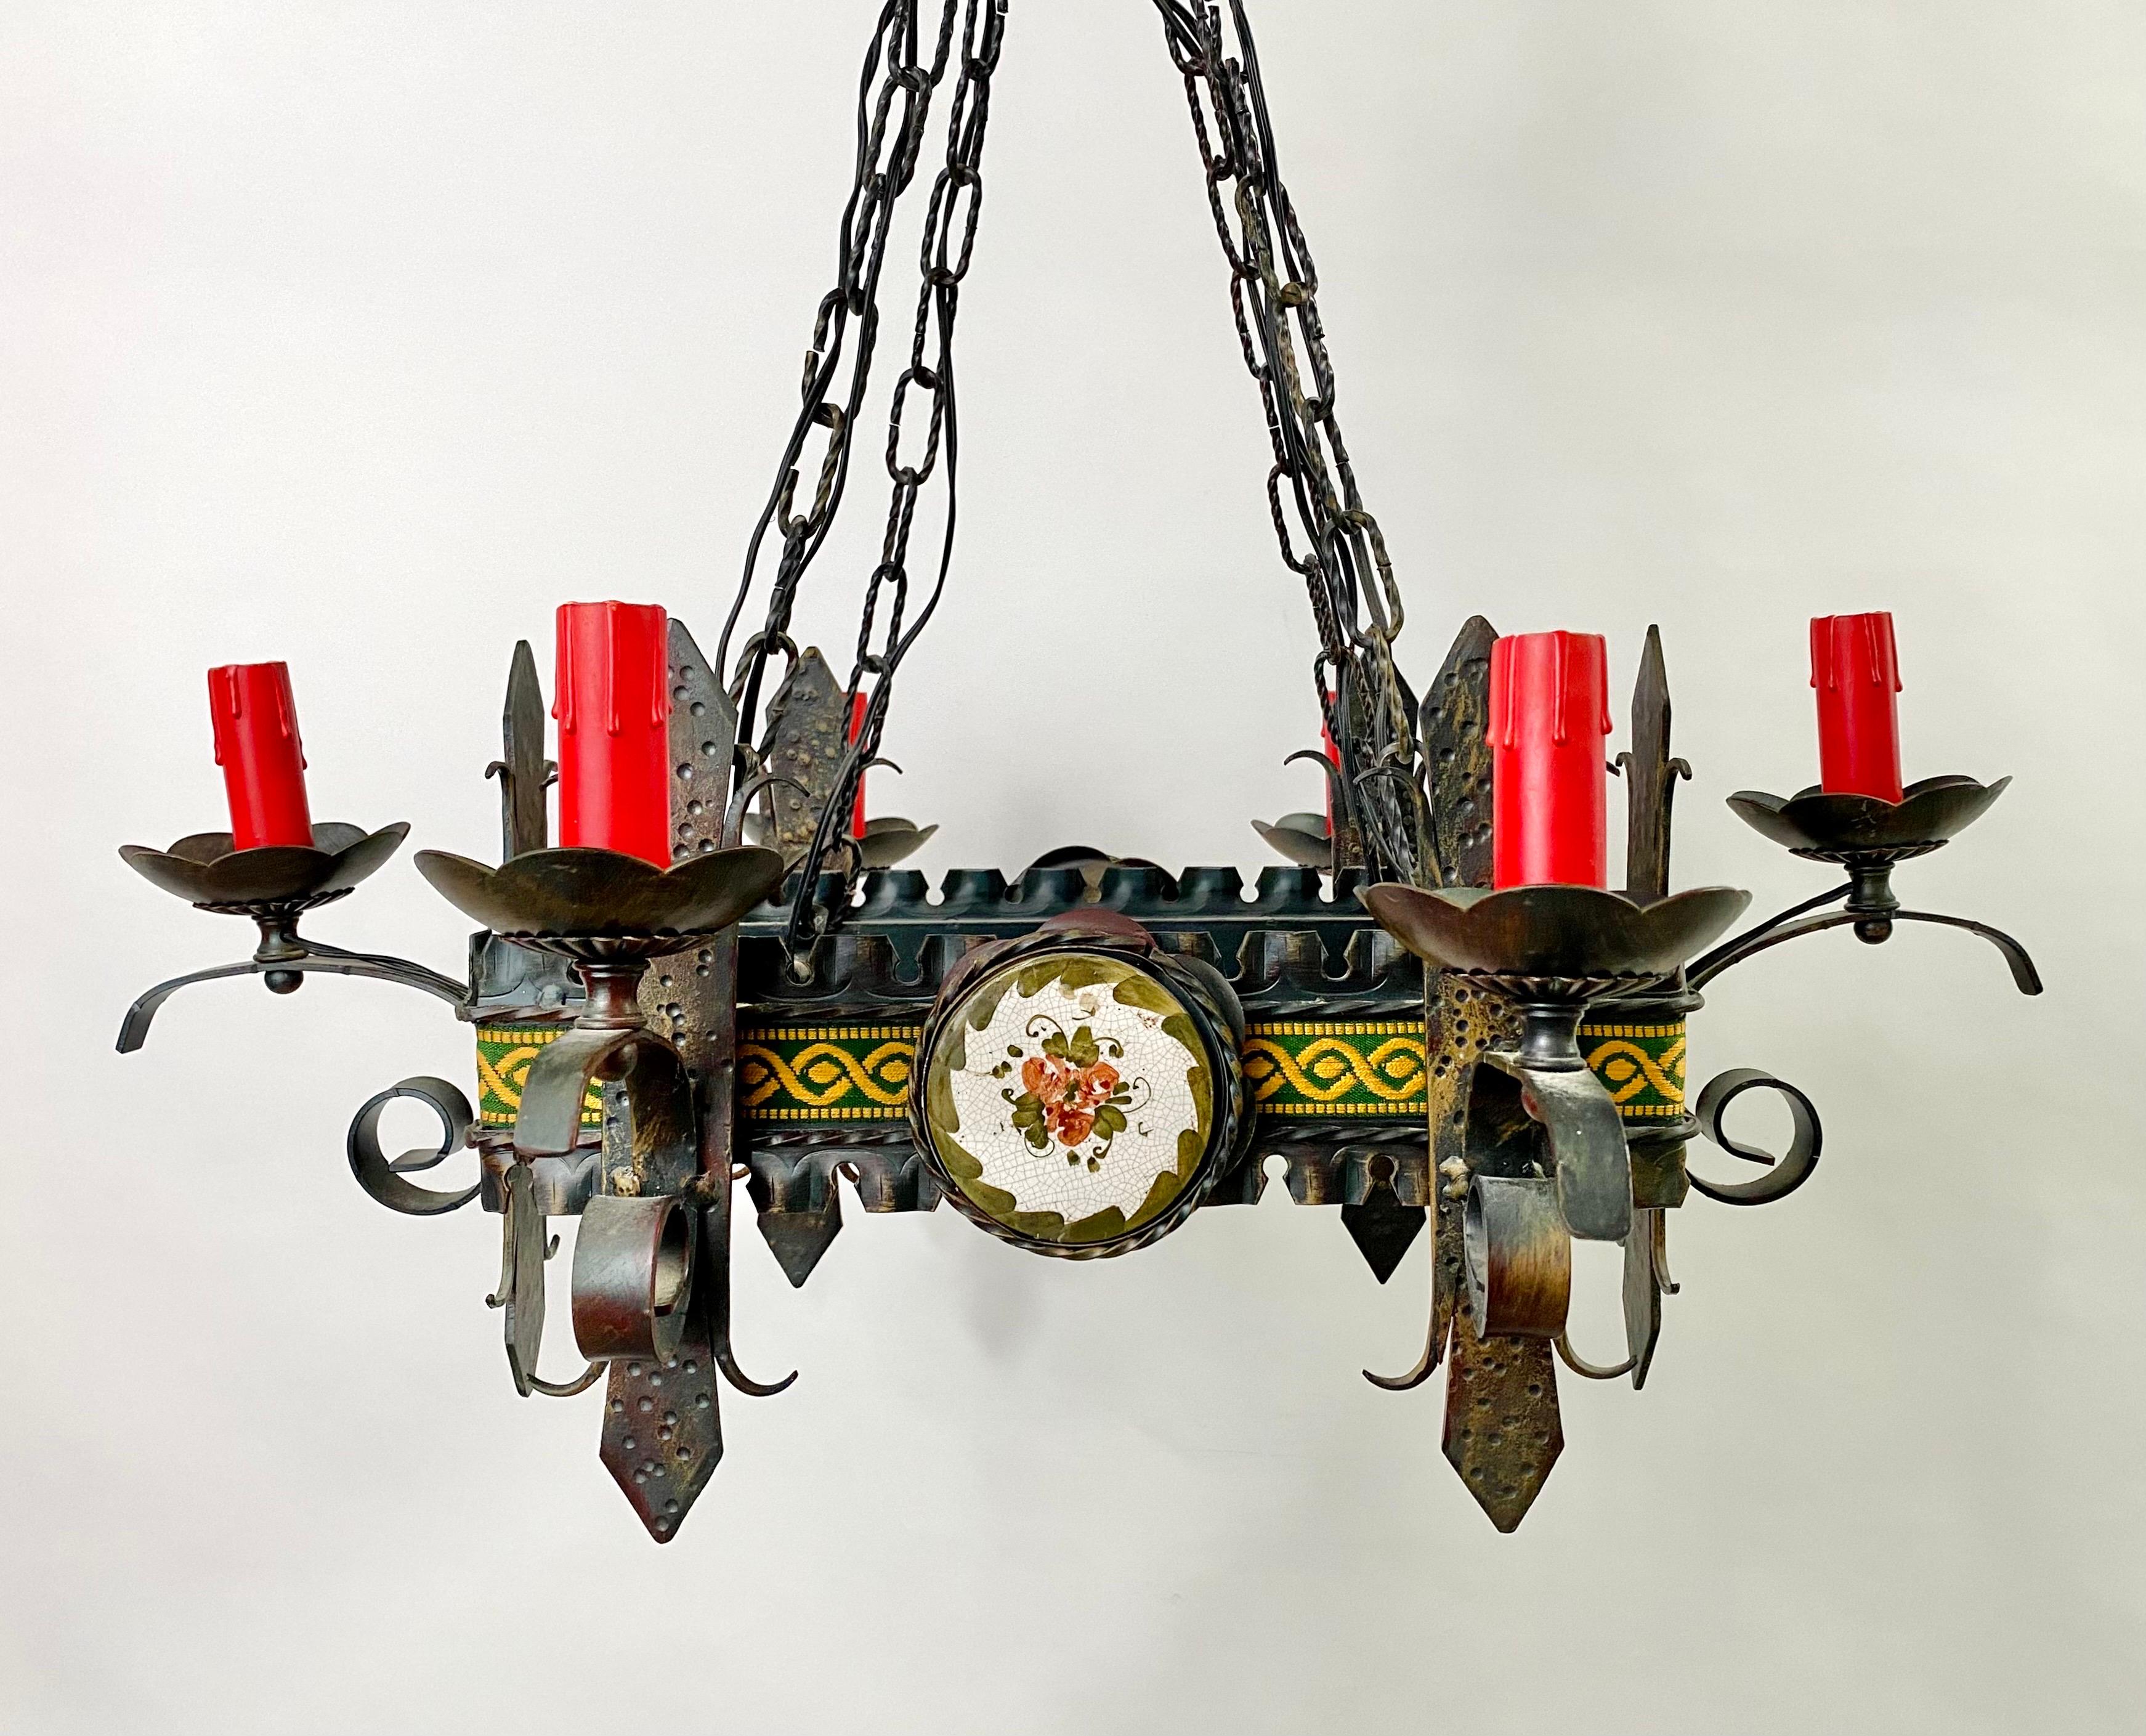 An exceptional 19th century French gothic style chandelier or pendant. The medieval style chandelier features a rectangular shape and has 6 lights . Finely carved of wrought iron, the chandelier shows amazing and intricate scrolls and swords design.